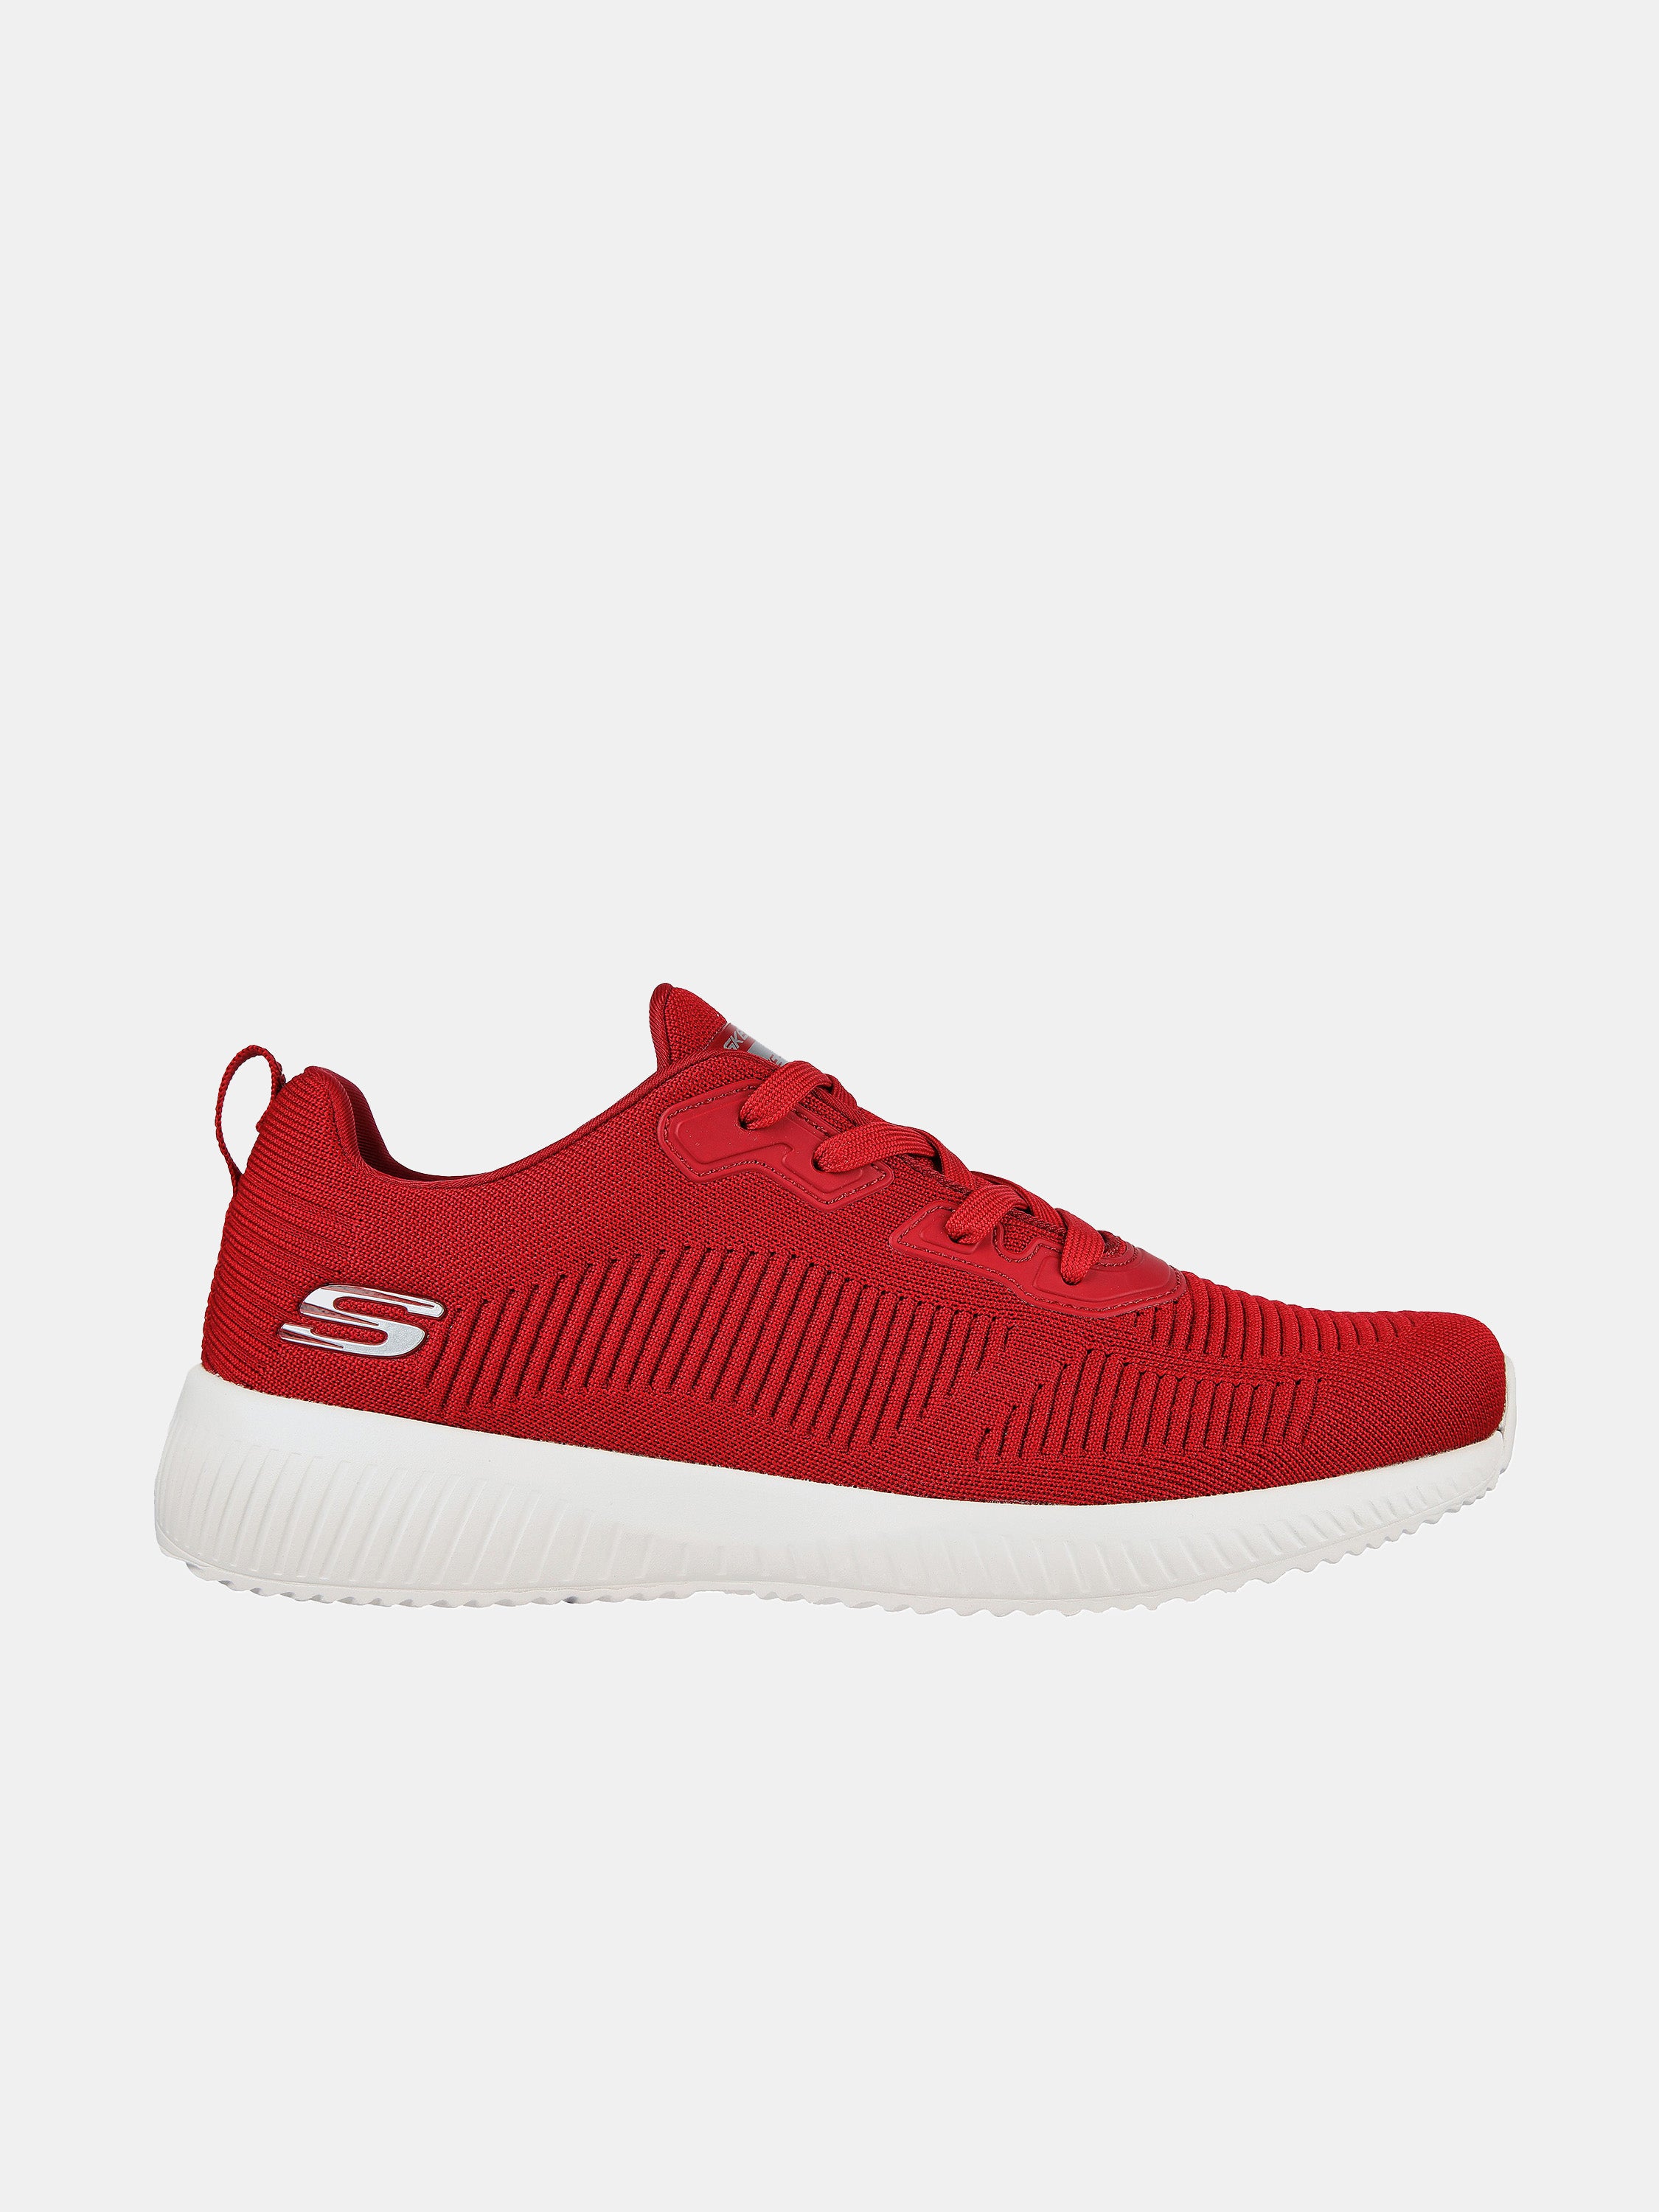 Skechers Men's Squad Sport Trainers #color_Red